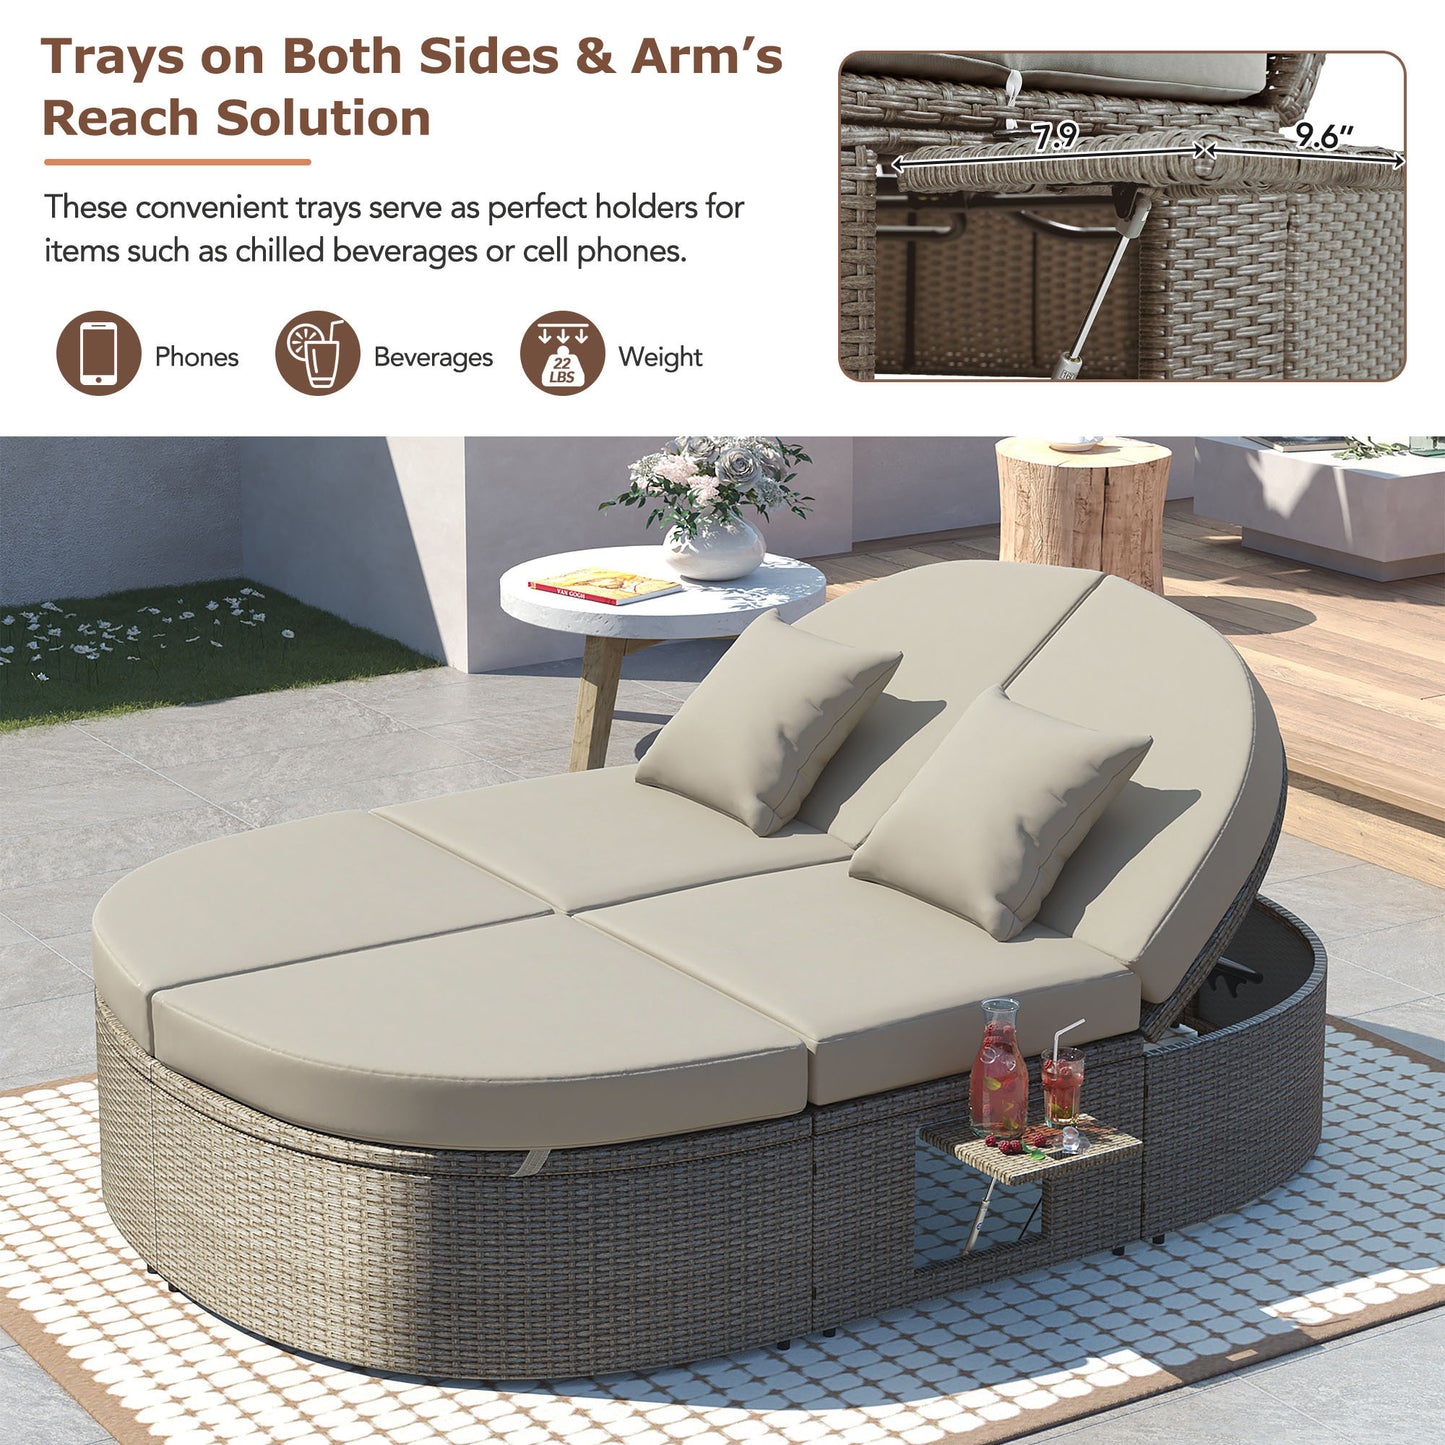 TOPMAX Outdoor Sun Bed Patio 2-Person Daybed with Cushions and Pillows, Rattan Garden Reclining Chaise Lounge with Adjustable Backrests and Foldable Cup Trays for Lawn,Poolside, Gray